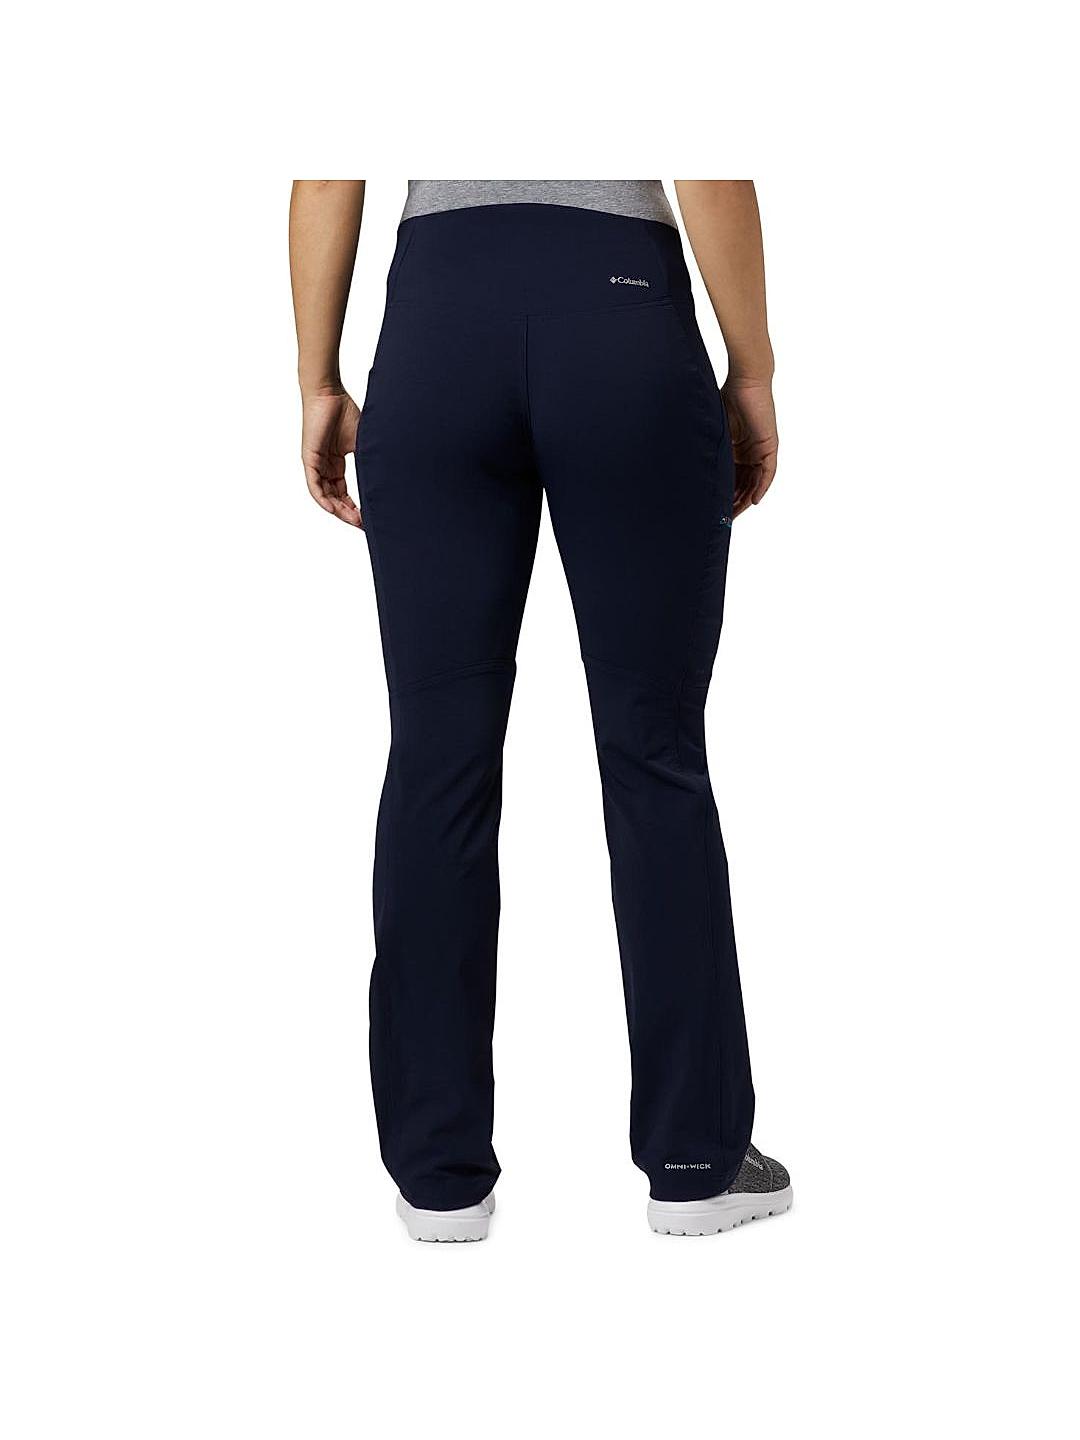 Buy Blue Passo Alto Pant for Women Online at Columbia Sportswear